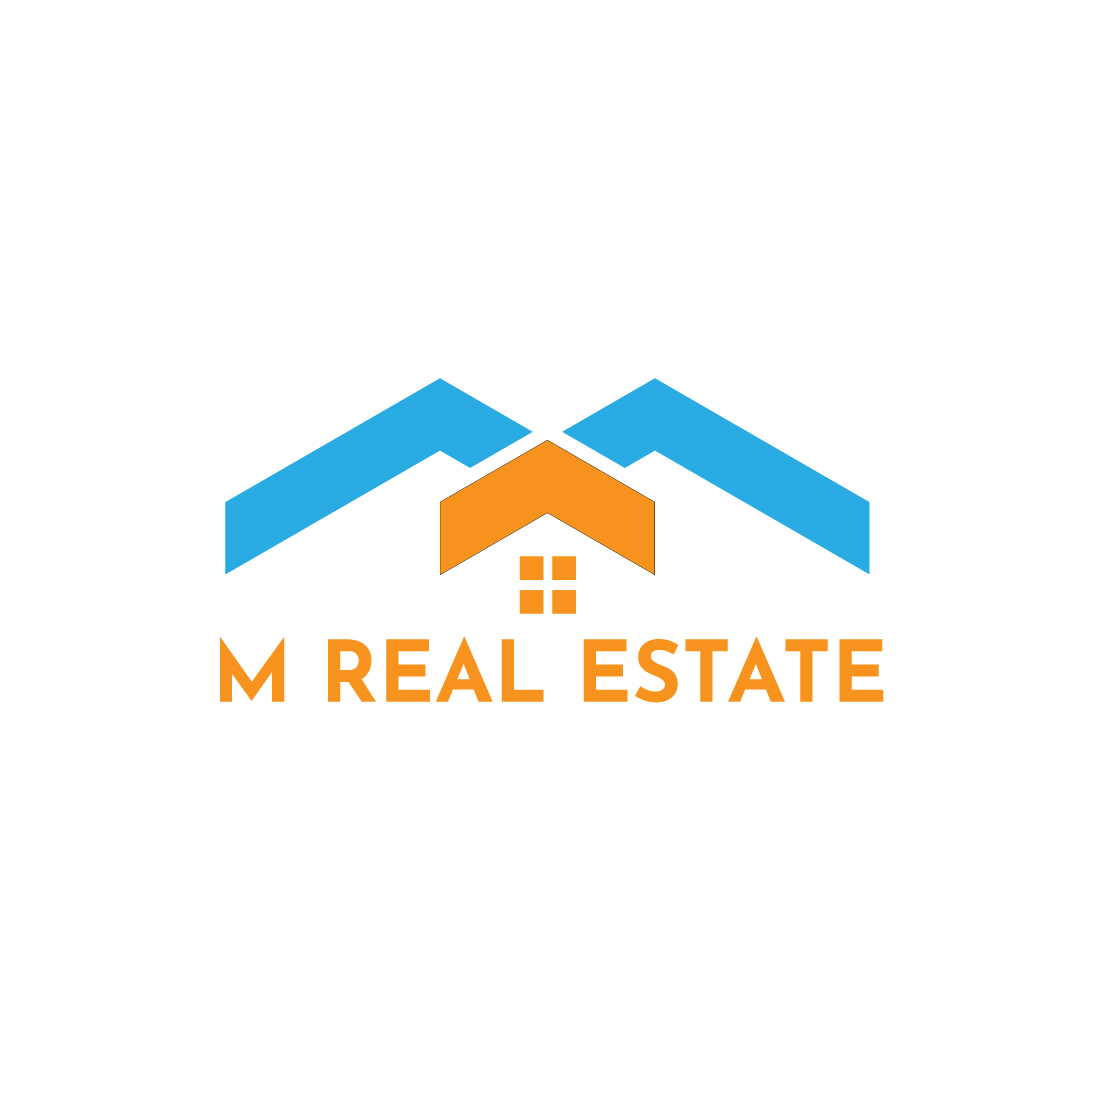 Introducing the "Minimal M Real Estate Logo" Bundle - A Symbol of Simplicity and Professionalism preview image.